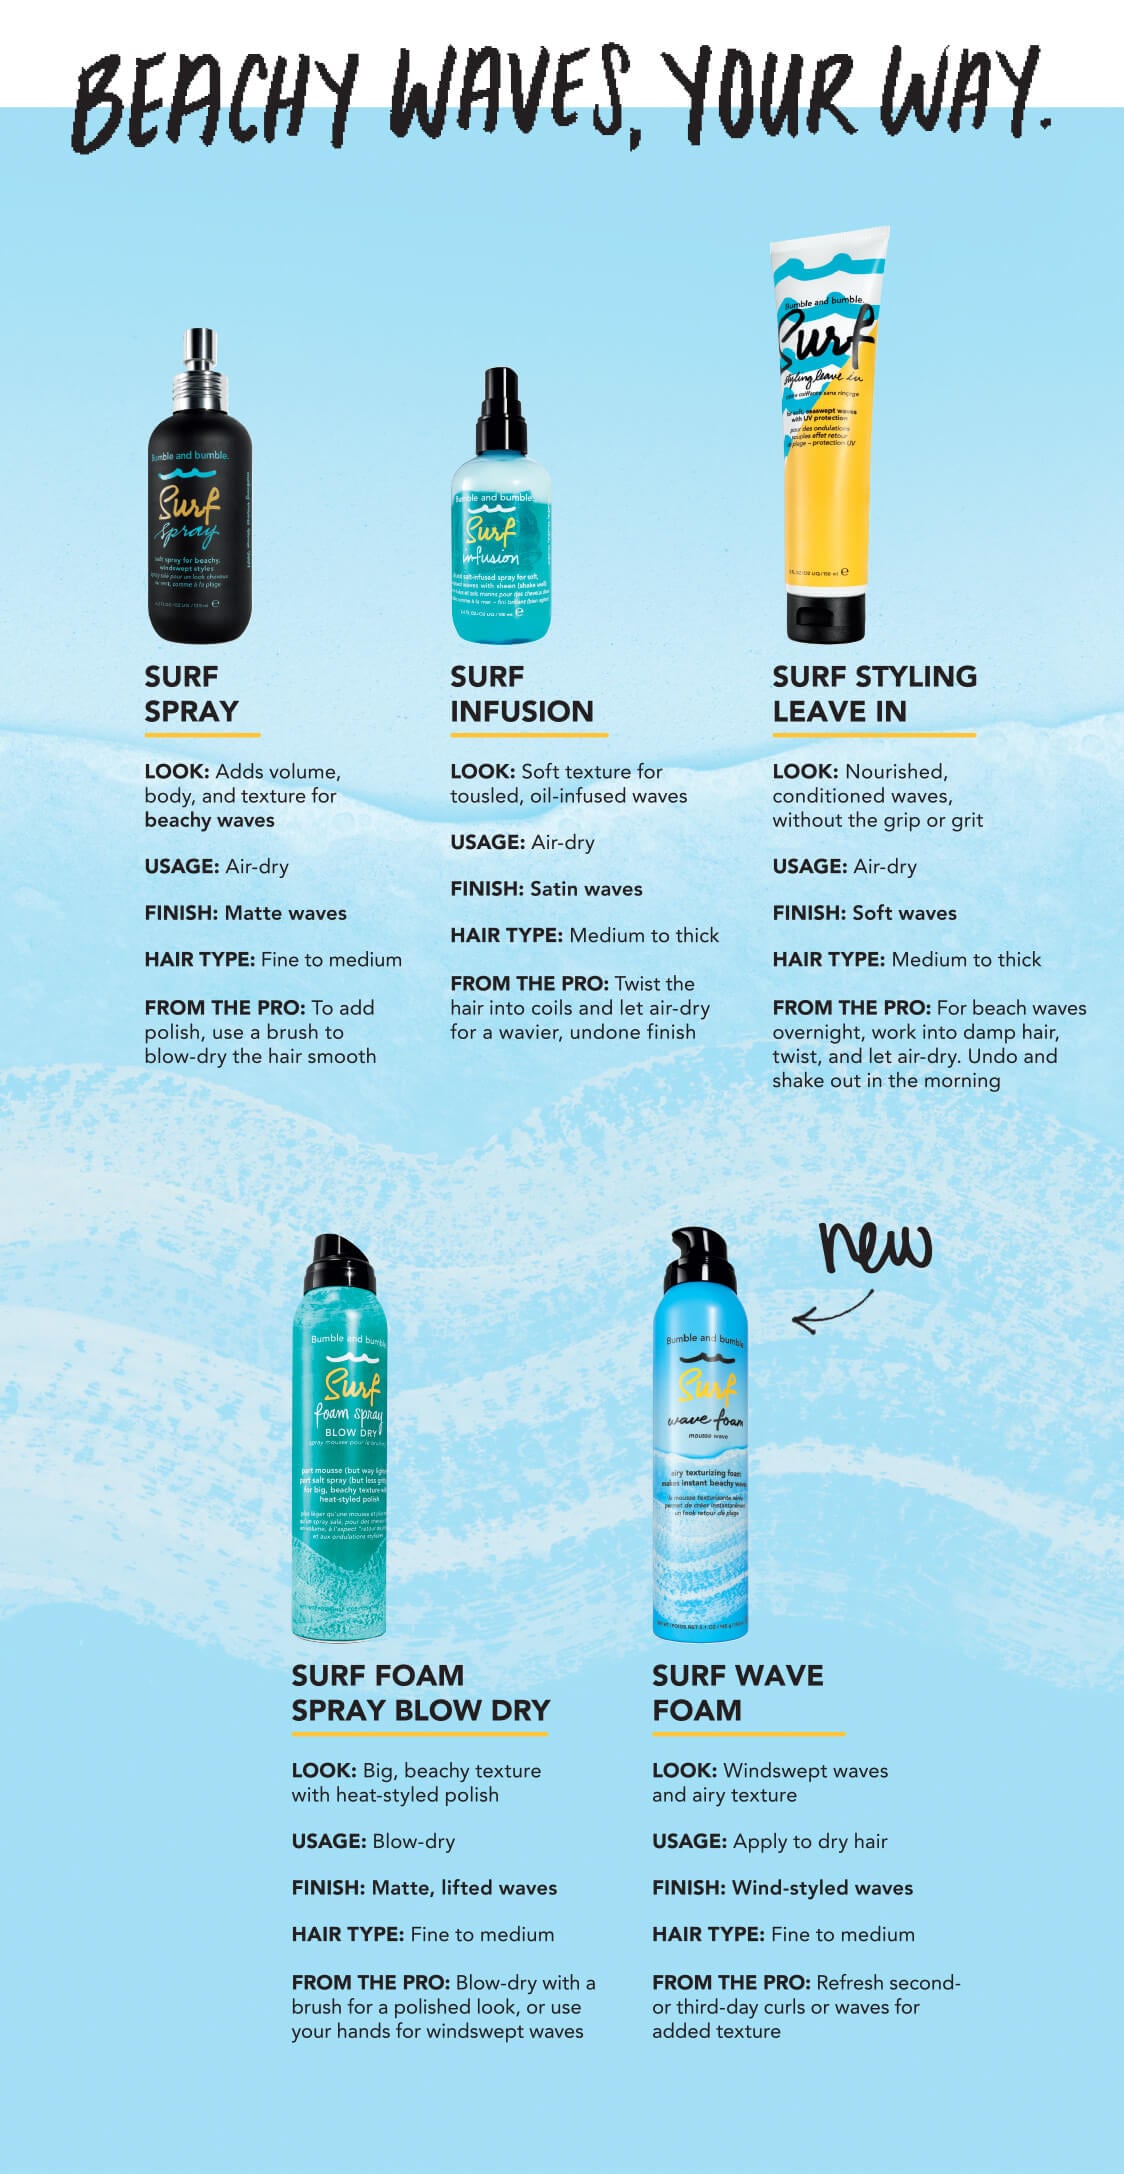 Bumble and bumble Surf Spray Reviews 2024